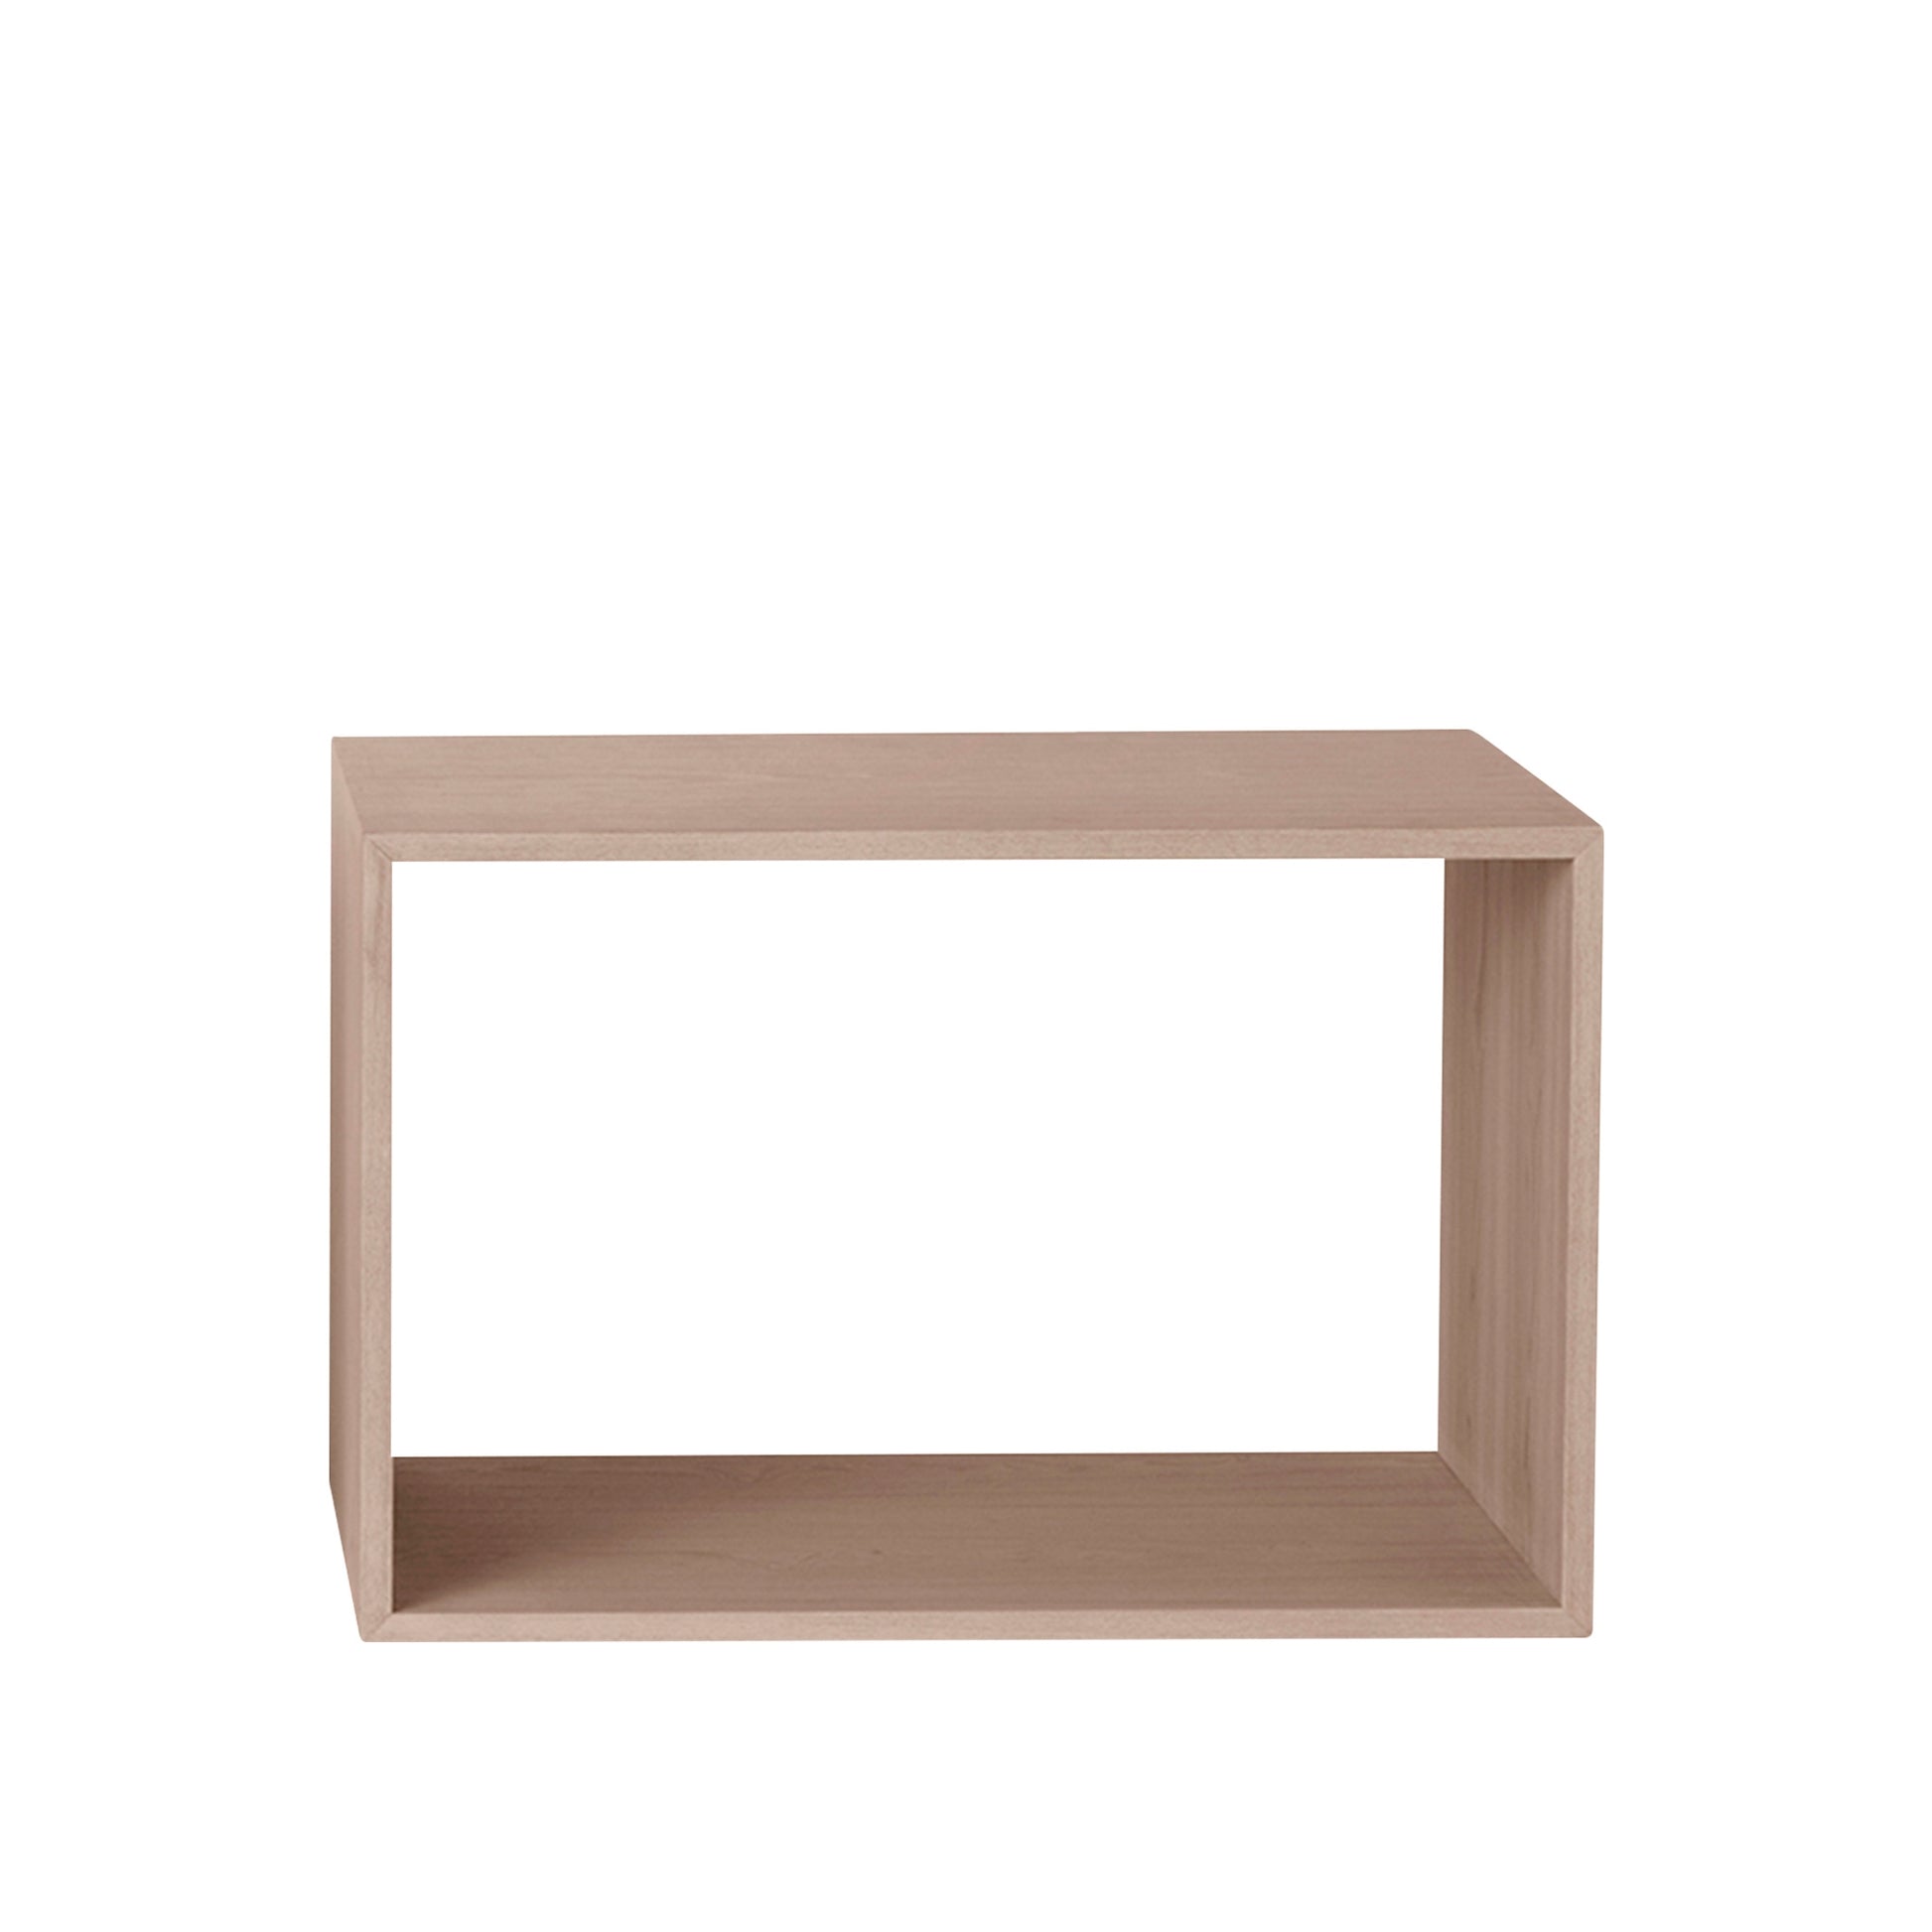 Stacked Reol System Large by Muuto #Oak